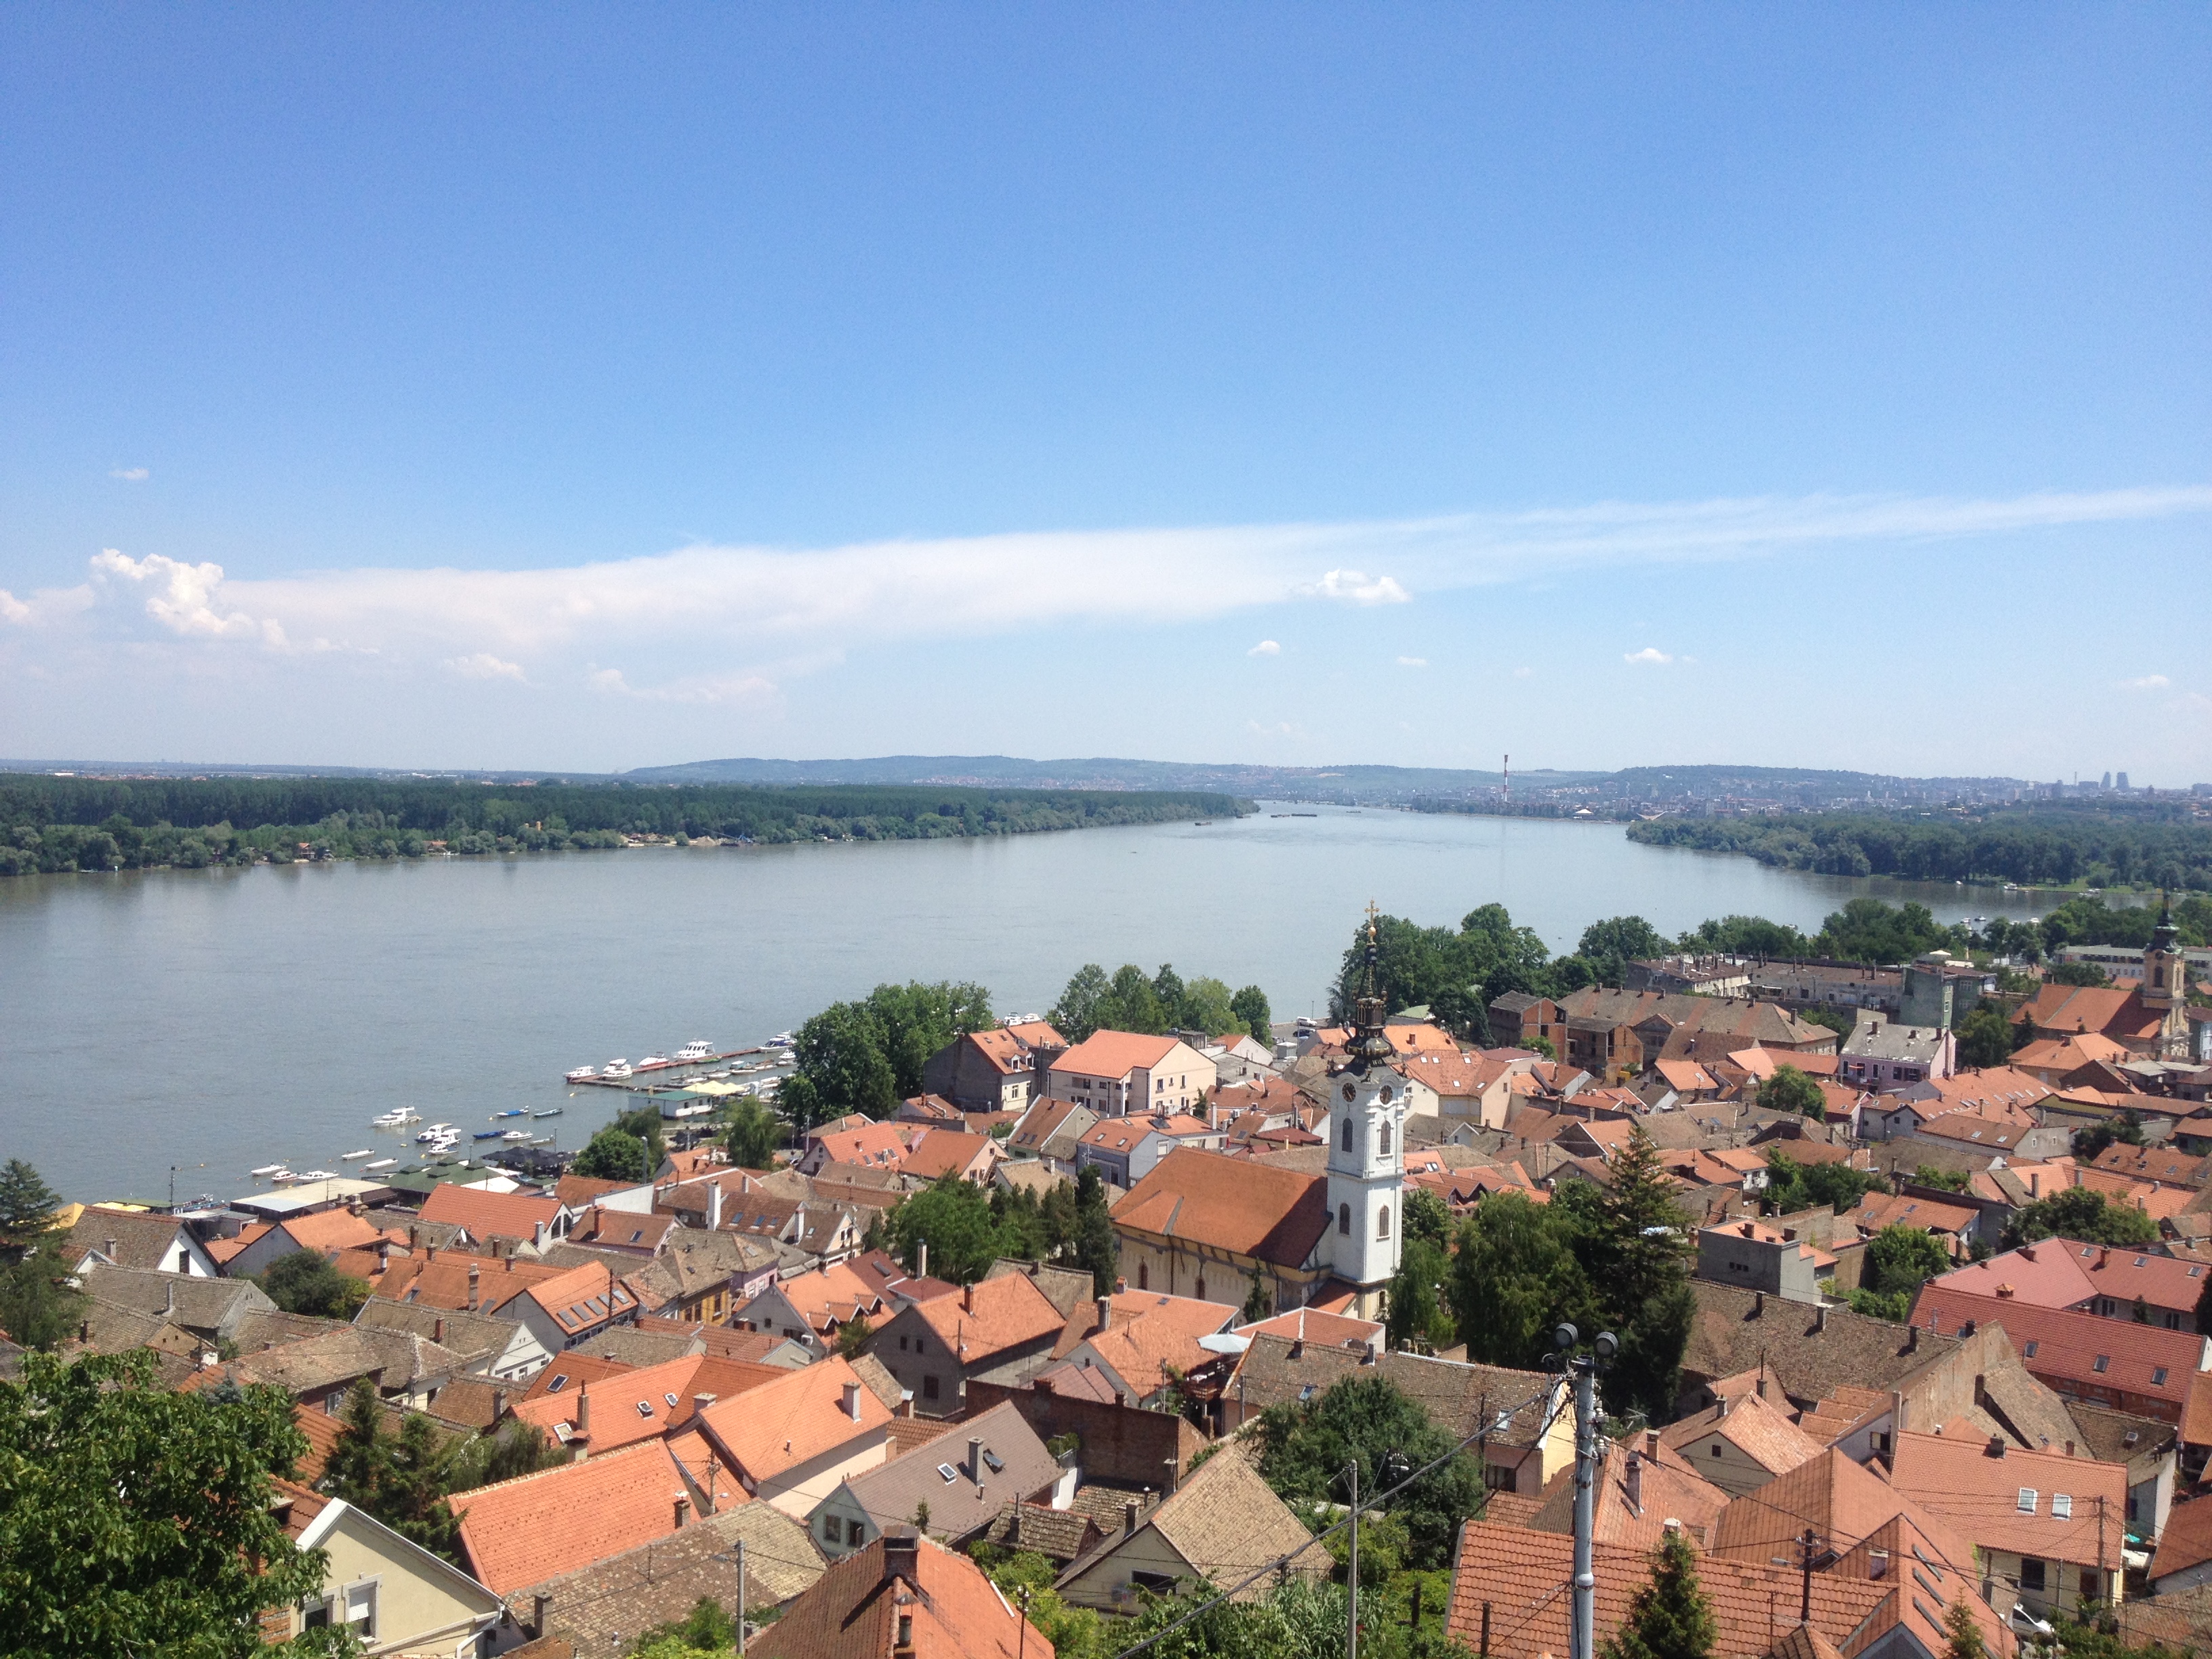 JUNE: Charming red roofs in Zemun from Gardos tower—once the Austro-Hungarian outpost that eyes Belgrade proper from the other side of the river.